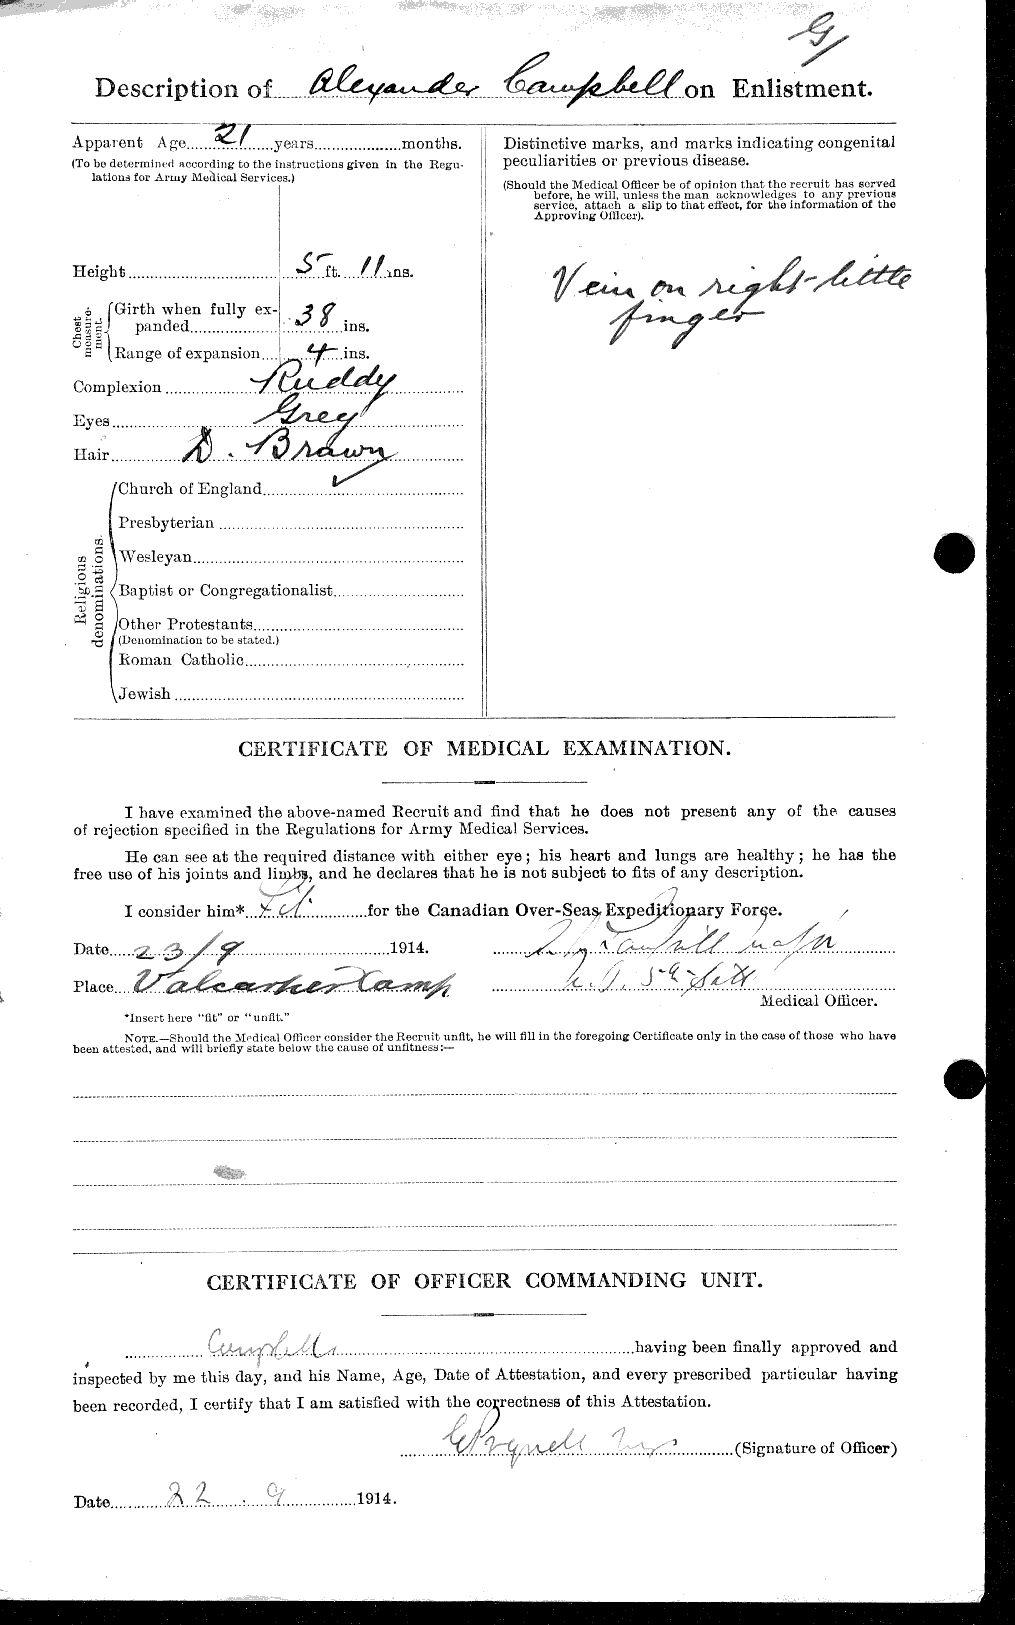 Personnel Records of the First World War - CEF 004884b